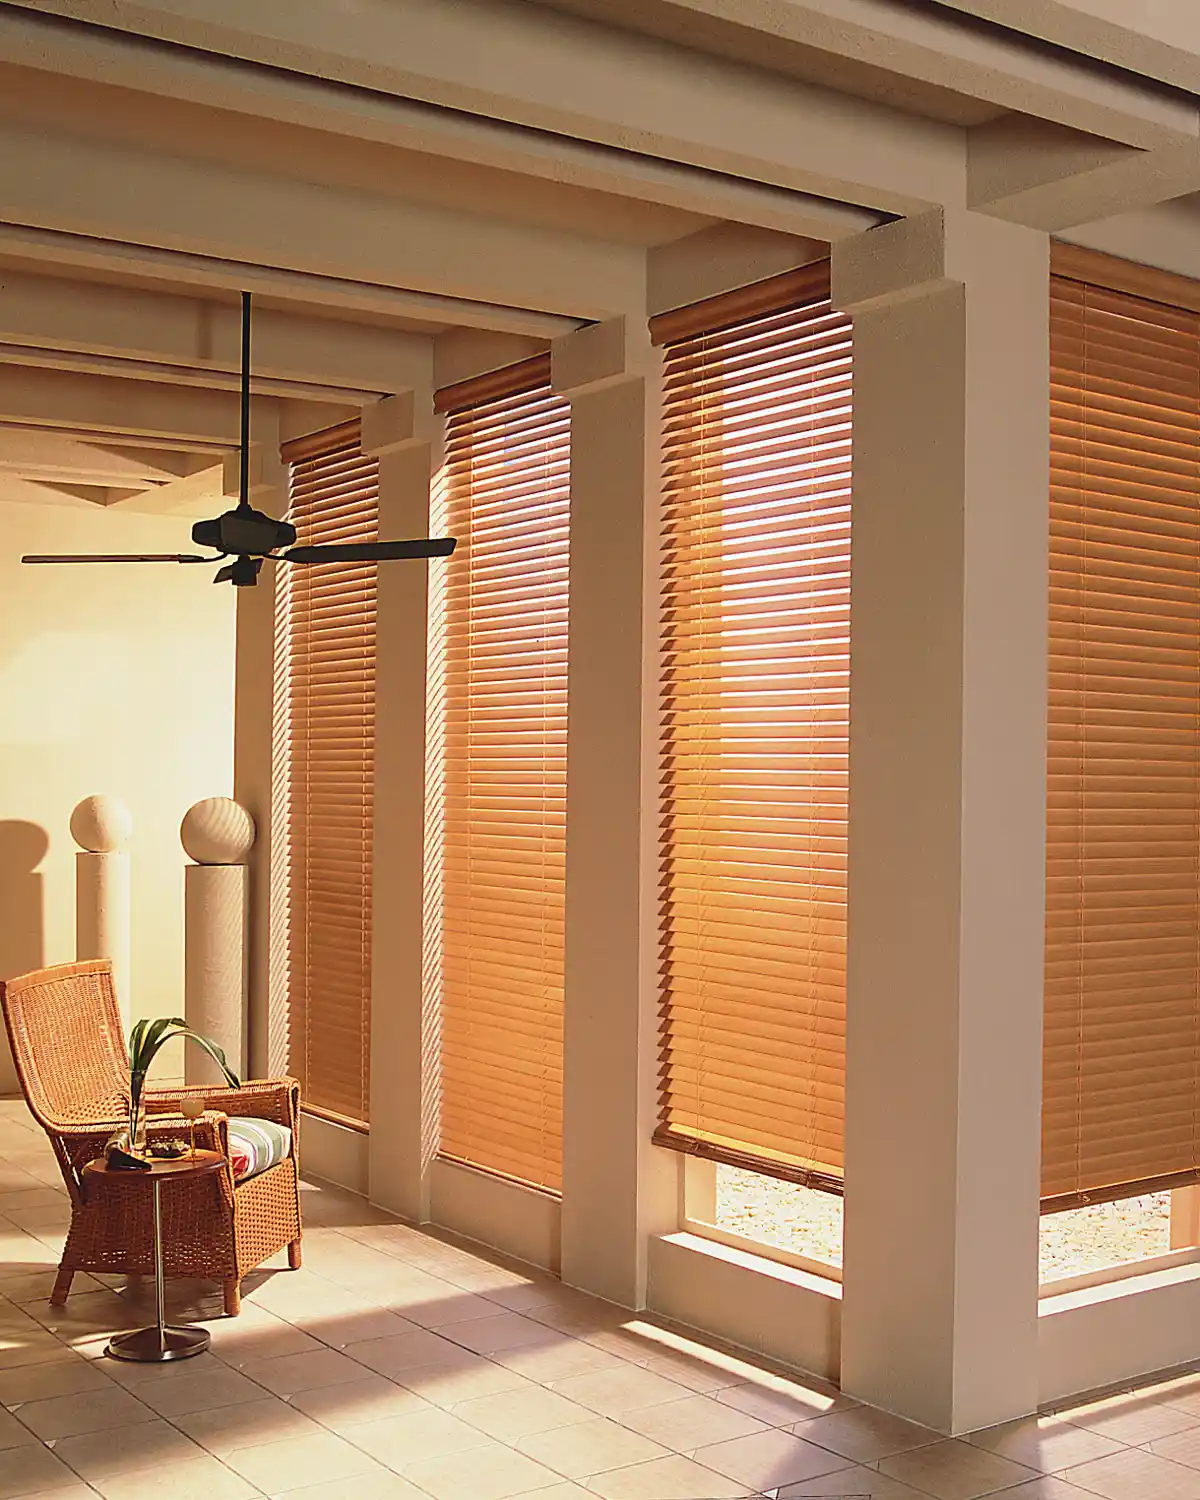 window treatments in a sun-filled room